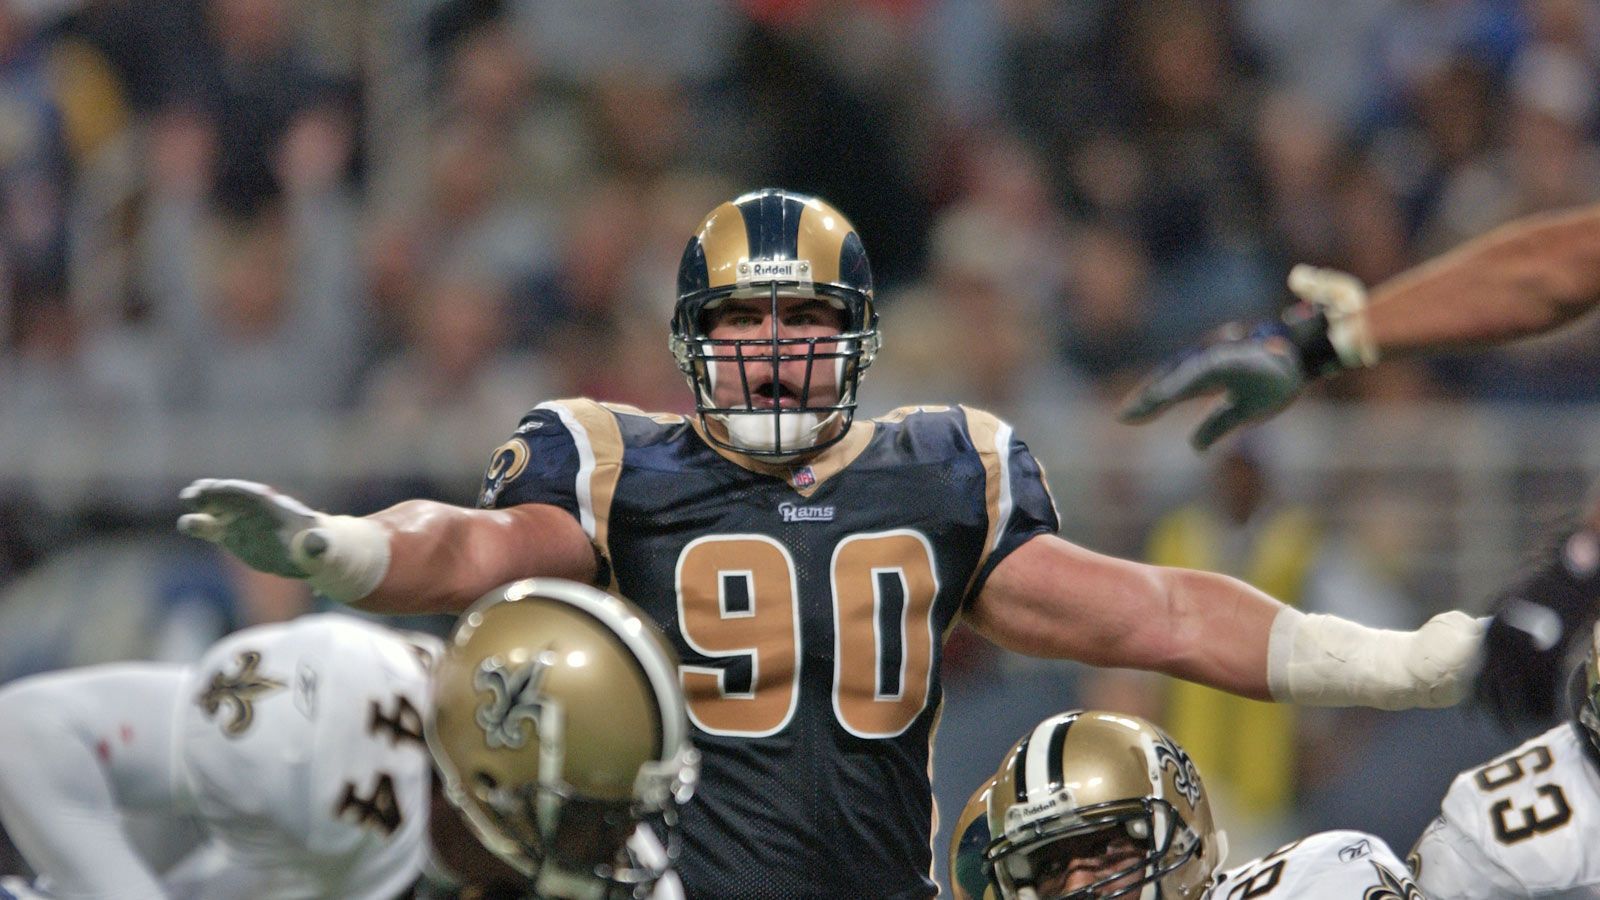 
                <strong>Super Bowl XXXIV (2000): St. Louis Rams - Tennessee Titans 23:16</strong><br>
                Jeff Zgonina (Mitte; St. Louis Rams) und Steve Jackson (Tennessee Titans).
              